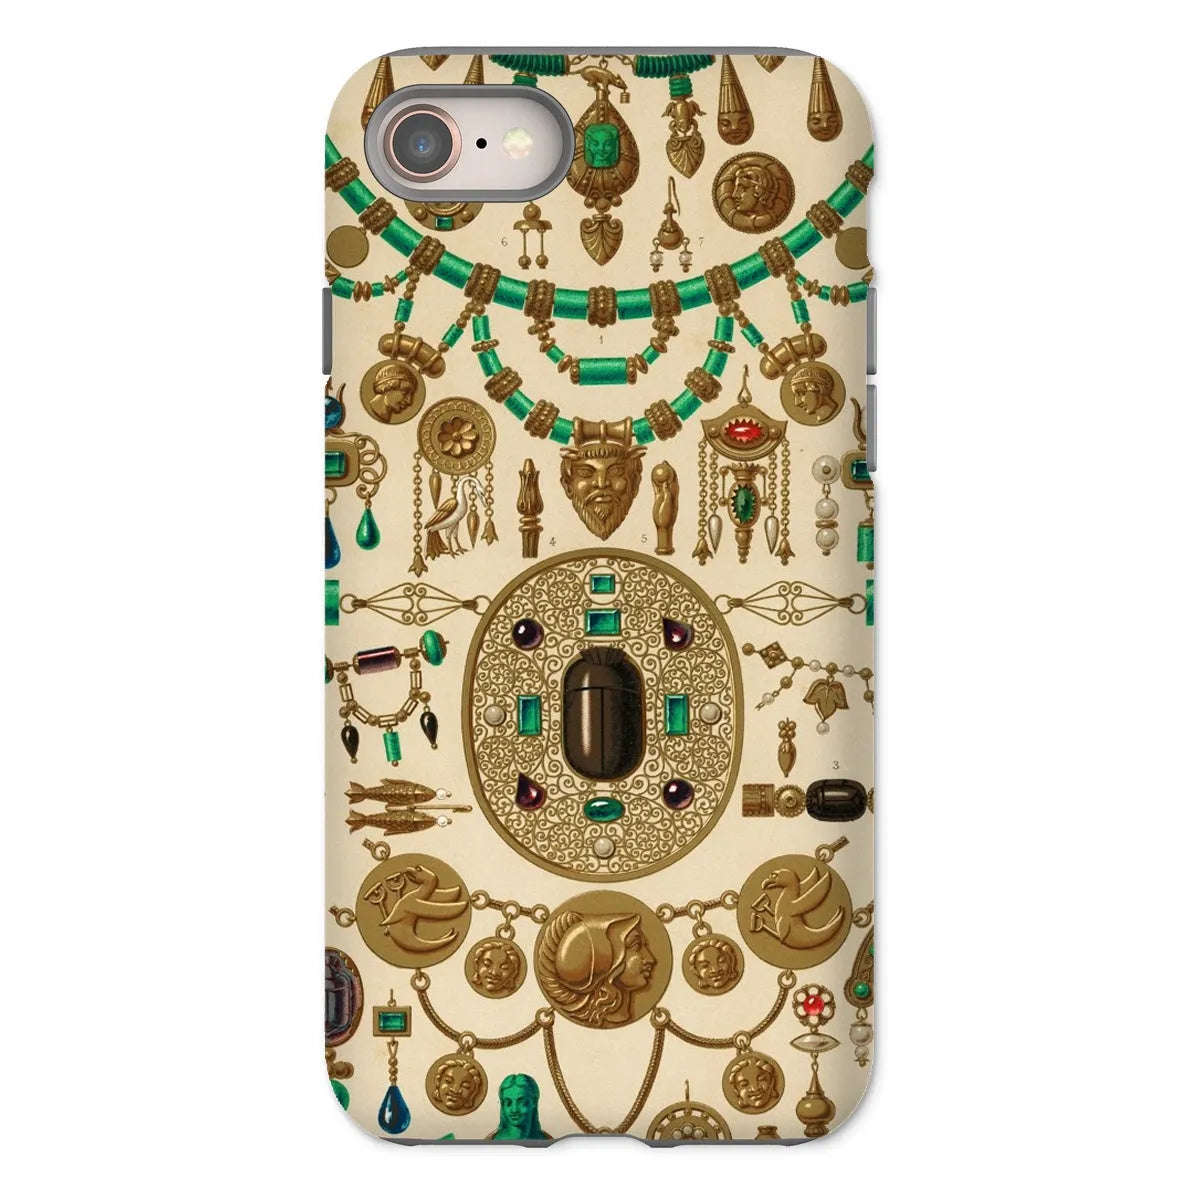 Etruscan Patterns From L’ornement Polychrome By Auguste Racinet Tough Phone Case - Iphone 8 / Matte - Mobile Phone